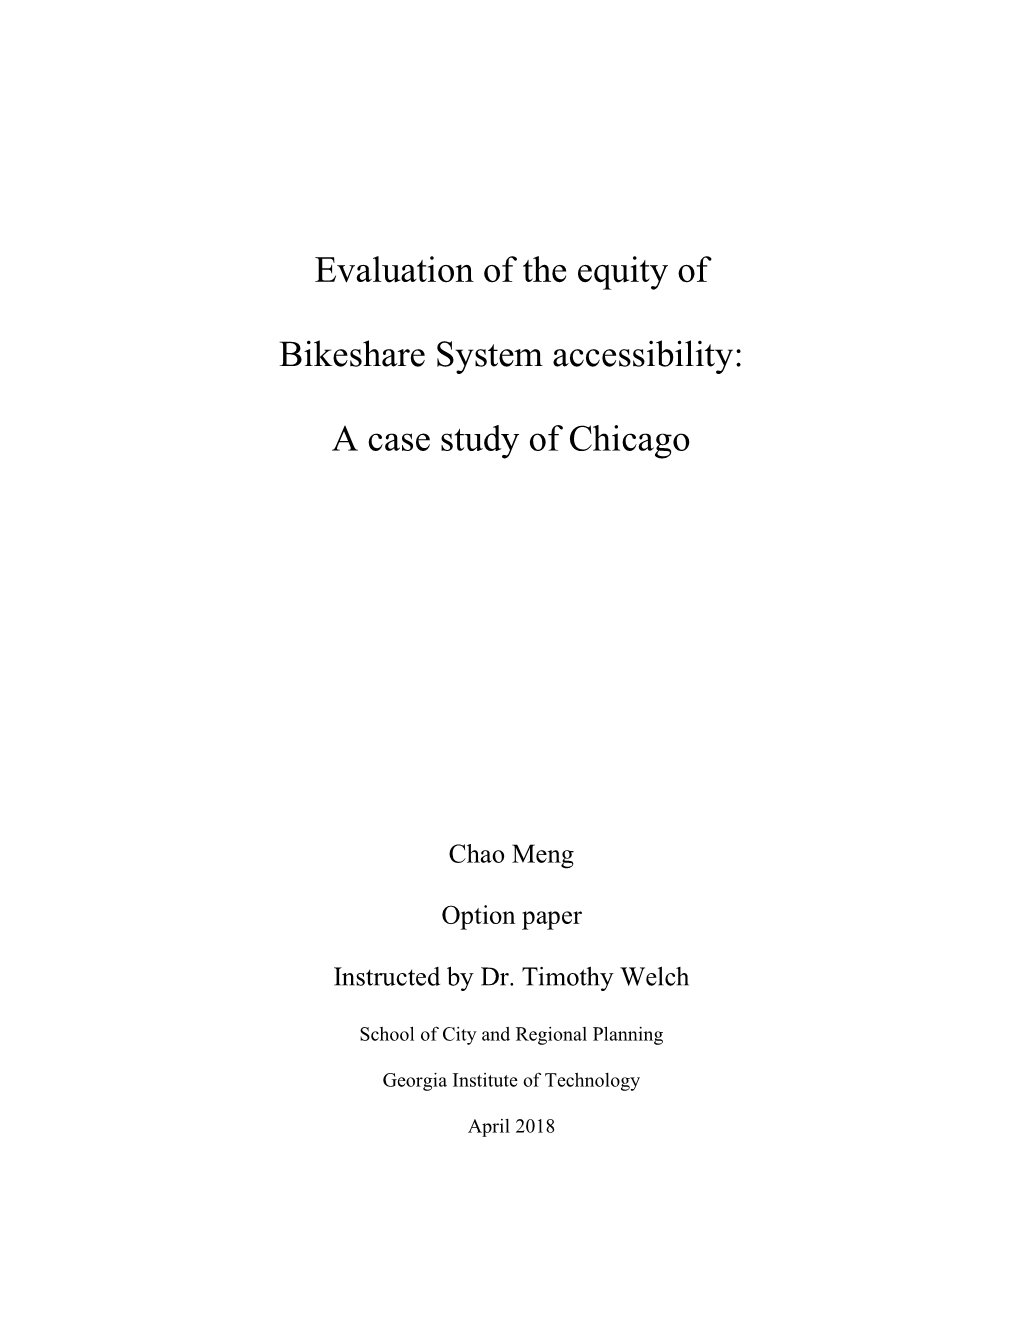 Evaluation of the Equity of Bikeshare System Accessibility: a Case Study of Chicago 2